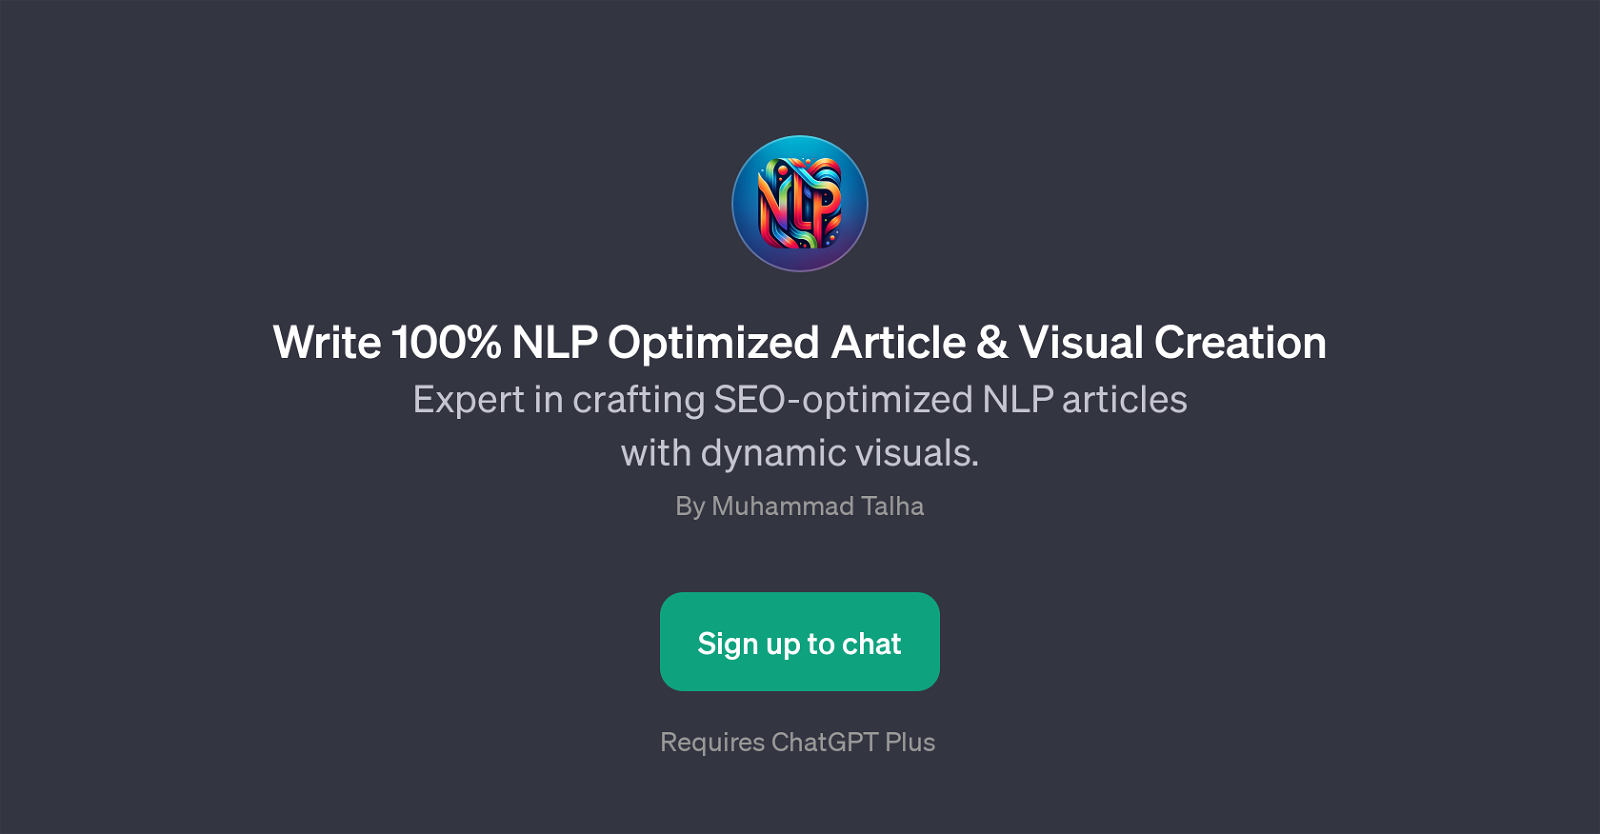 Write 100% NLP Optimized Article & Visual Creation website